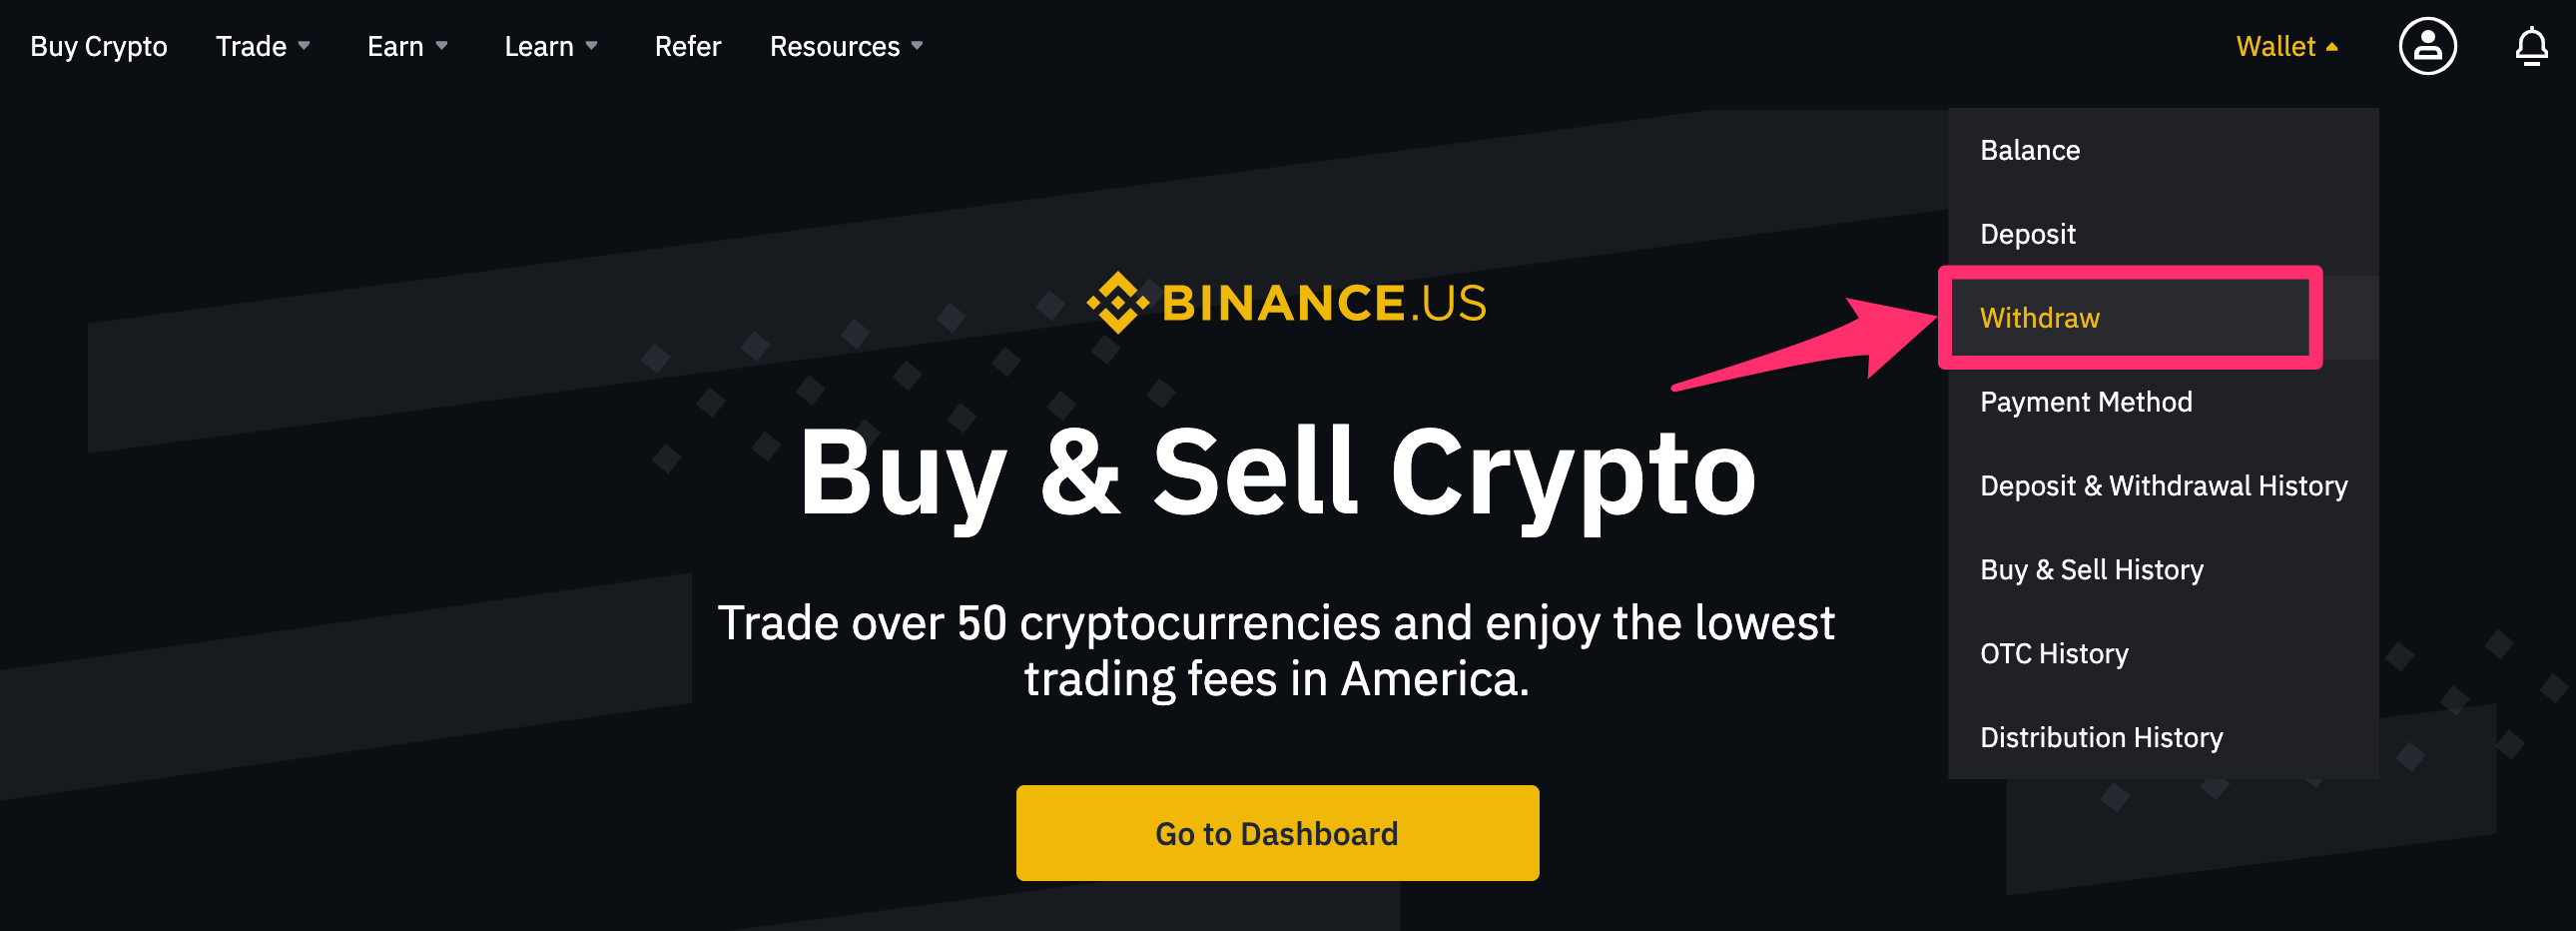 How To Transfer Crypto From Binance To Binance Us - DINCOG